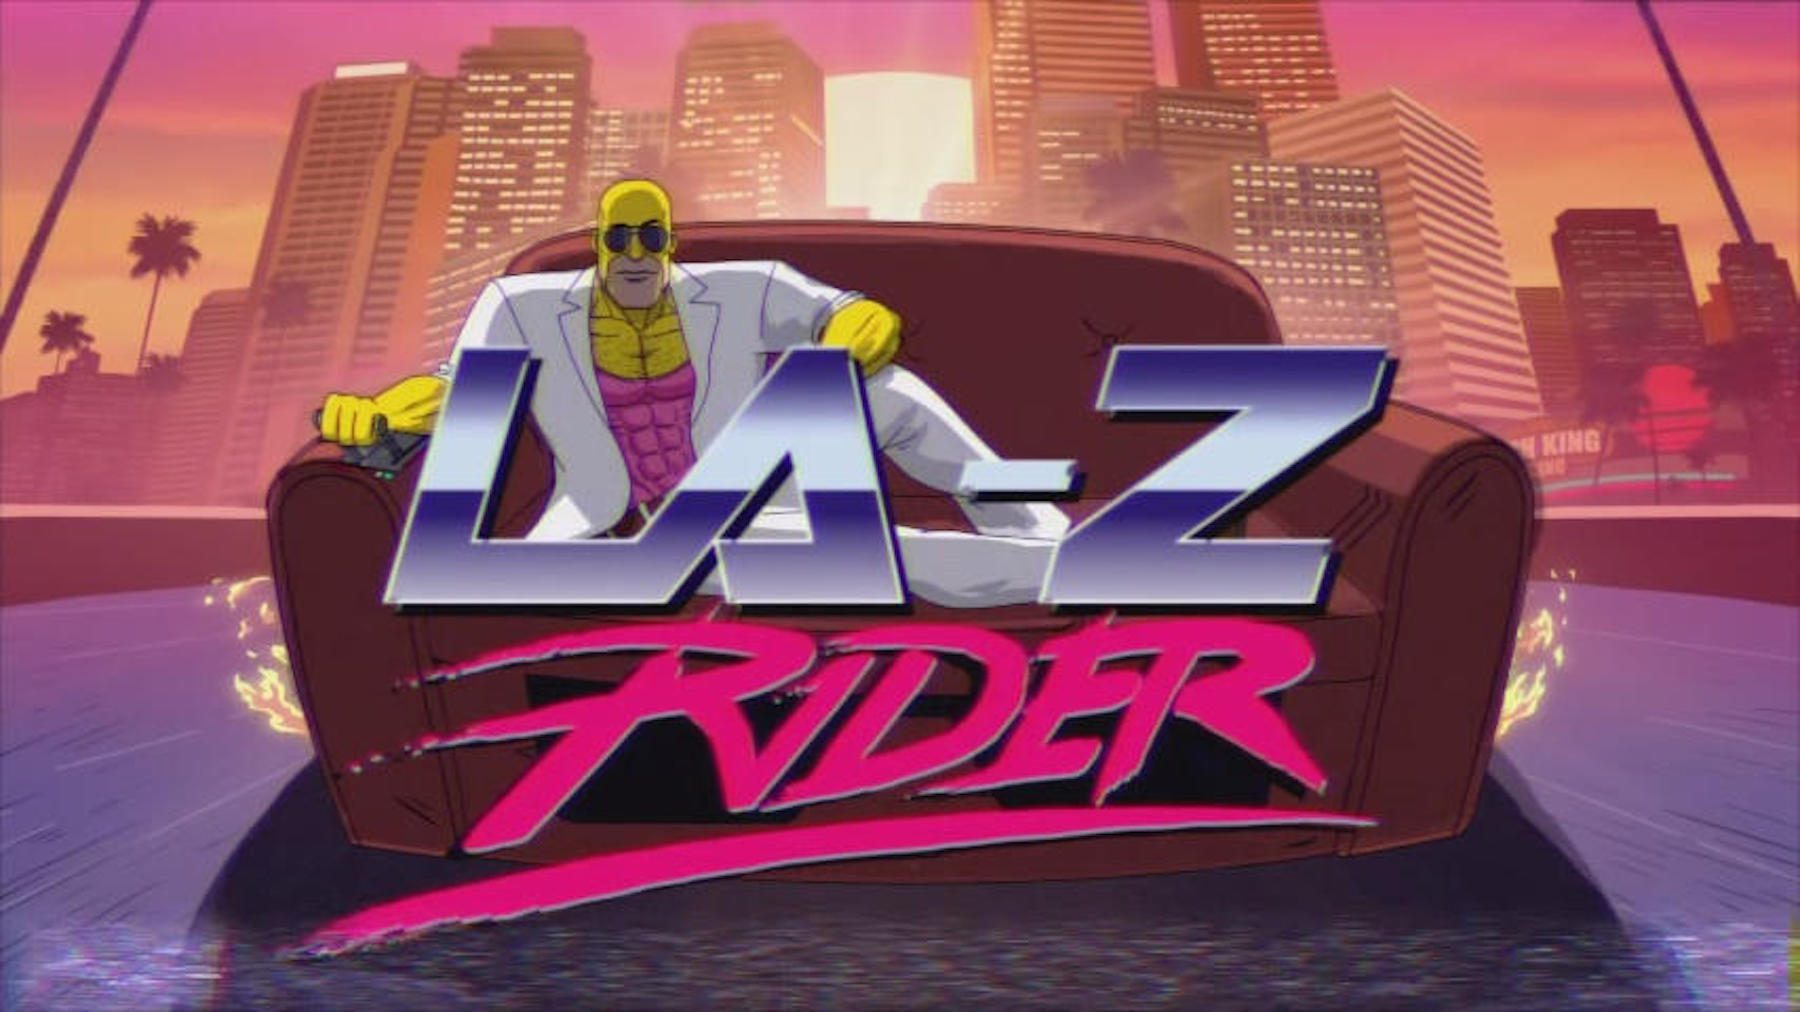 Shot from La-Z Rider Simpsons couch gag, with Homer as an 80s action star on his sofa.